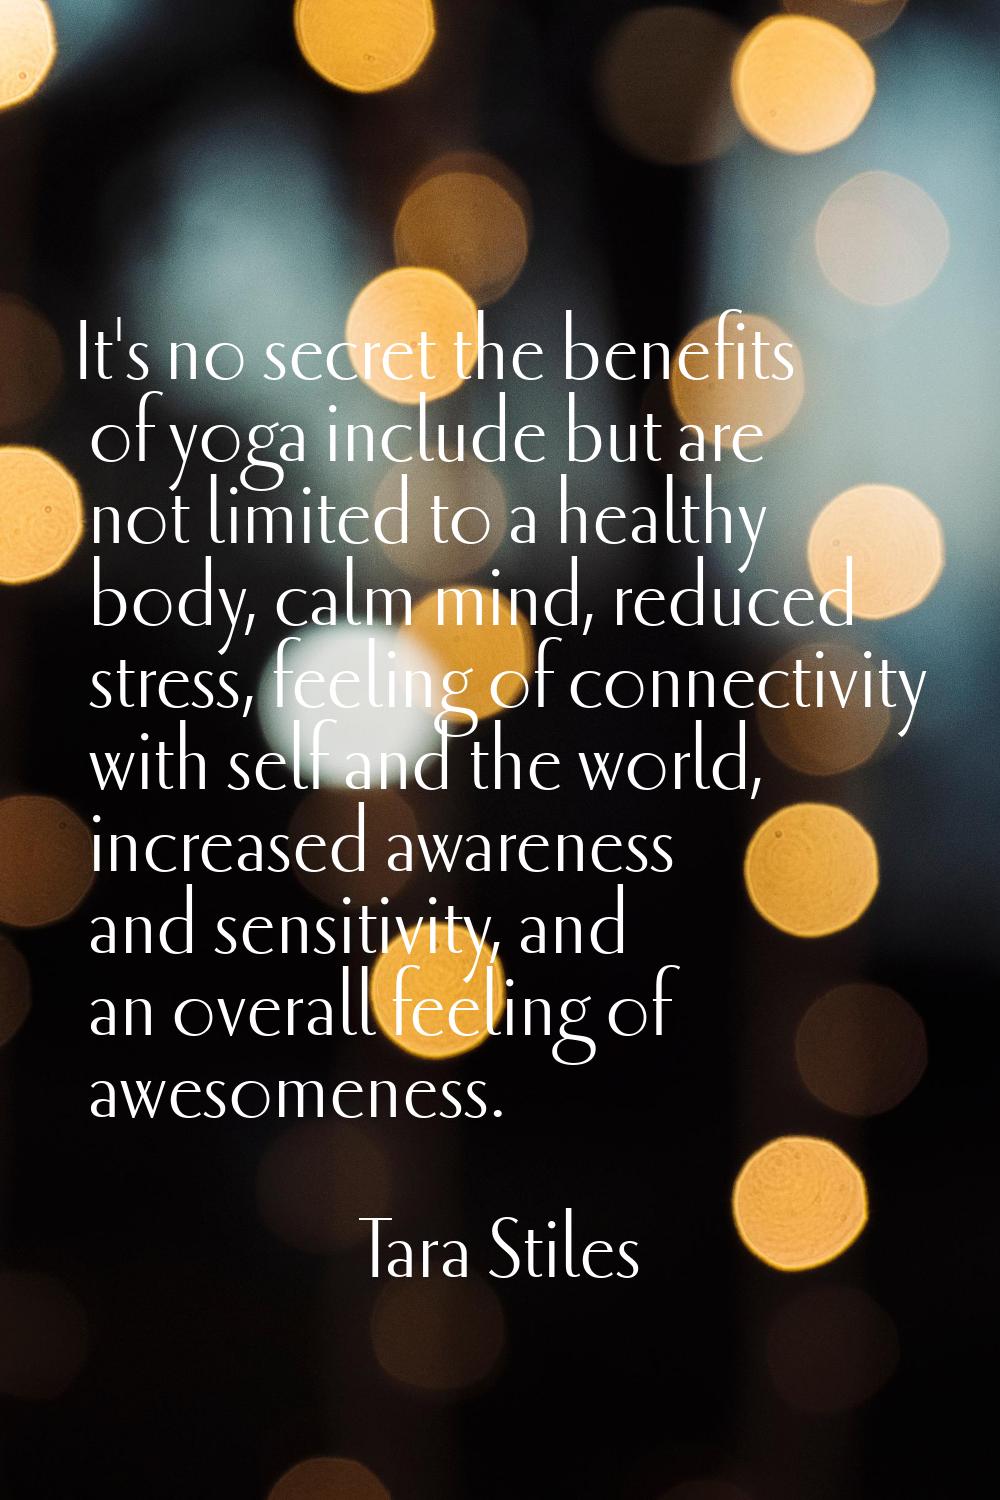 It's no secret the benefits of yoga include but are not limited to a healthy body, calm mind, reduc